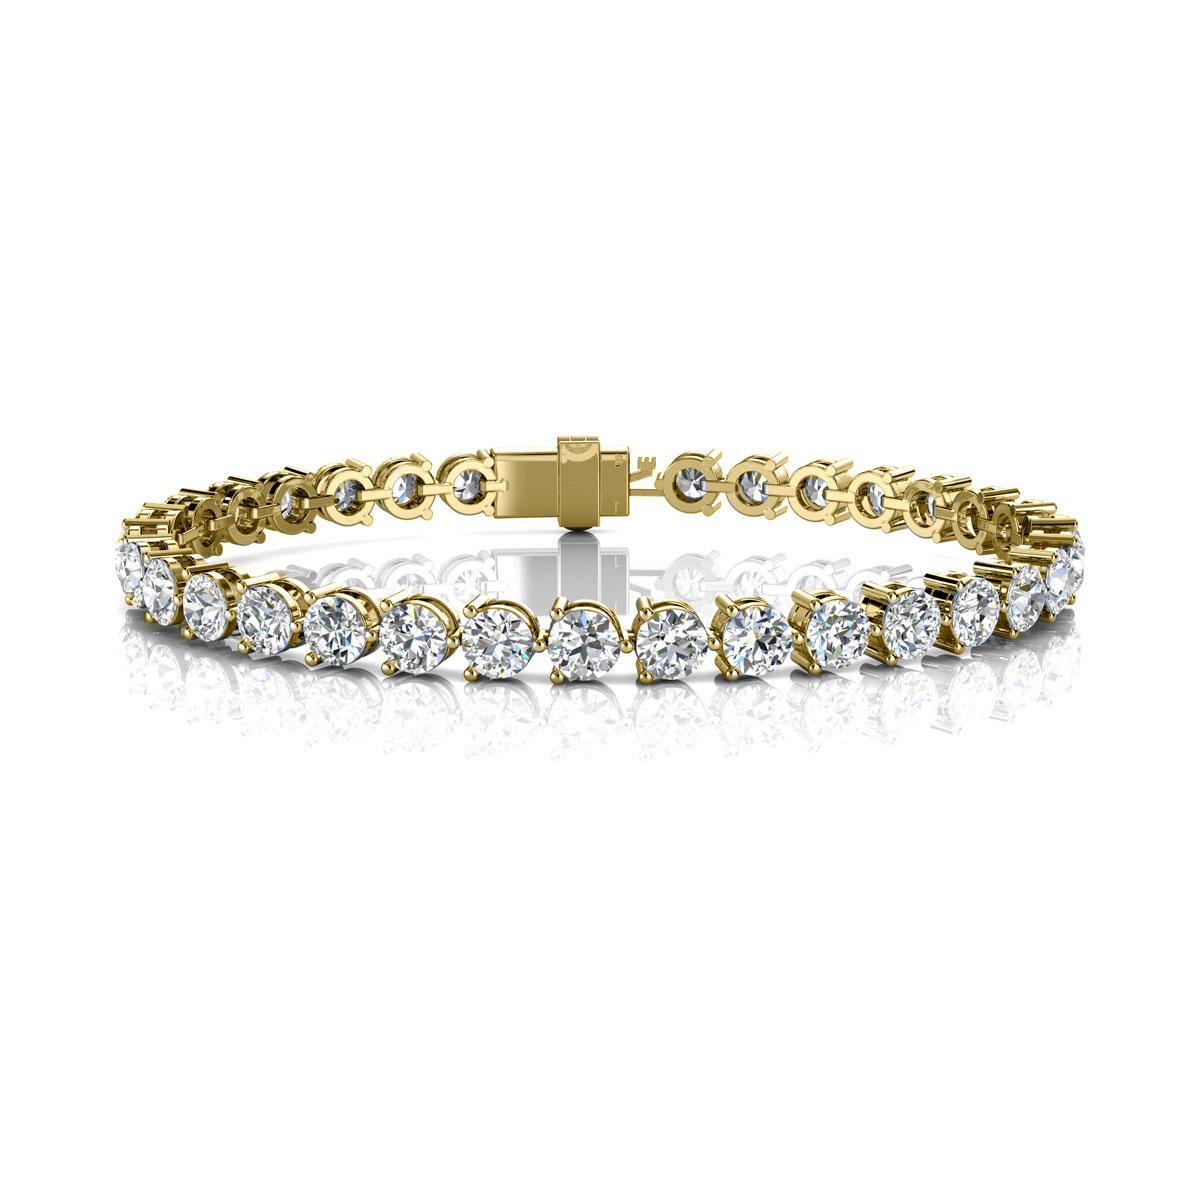 A timeless three prongs diamonds tennis bracelet. Experience the Difference!

Product details: 

Center Gemstone Type: NATURAL DIAMOND
Center Gemstone Color: WHITE
Center Gemstone Shape: ROUND
Center Diamond Carat Weight: 10
Metal: 18K Yellow